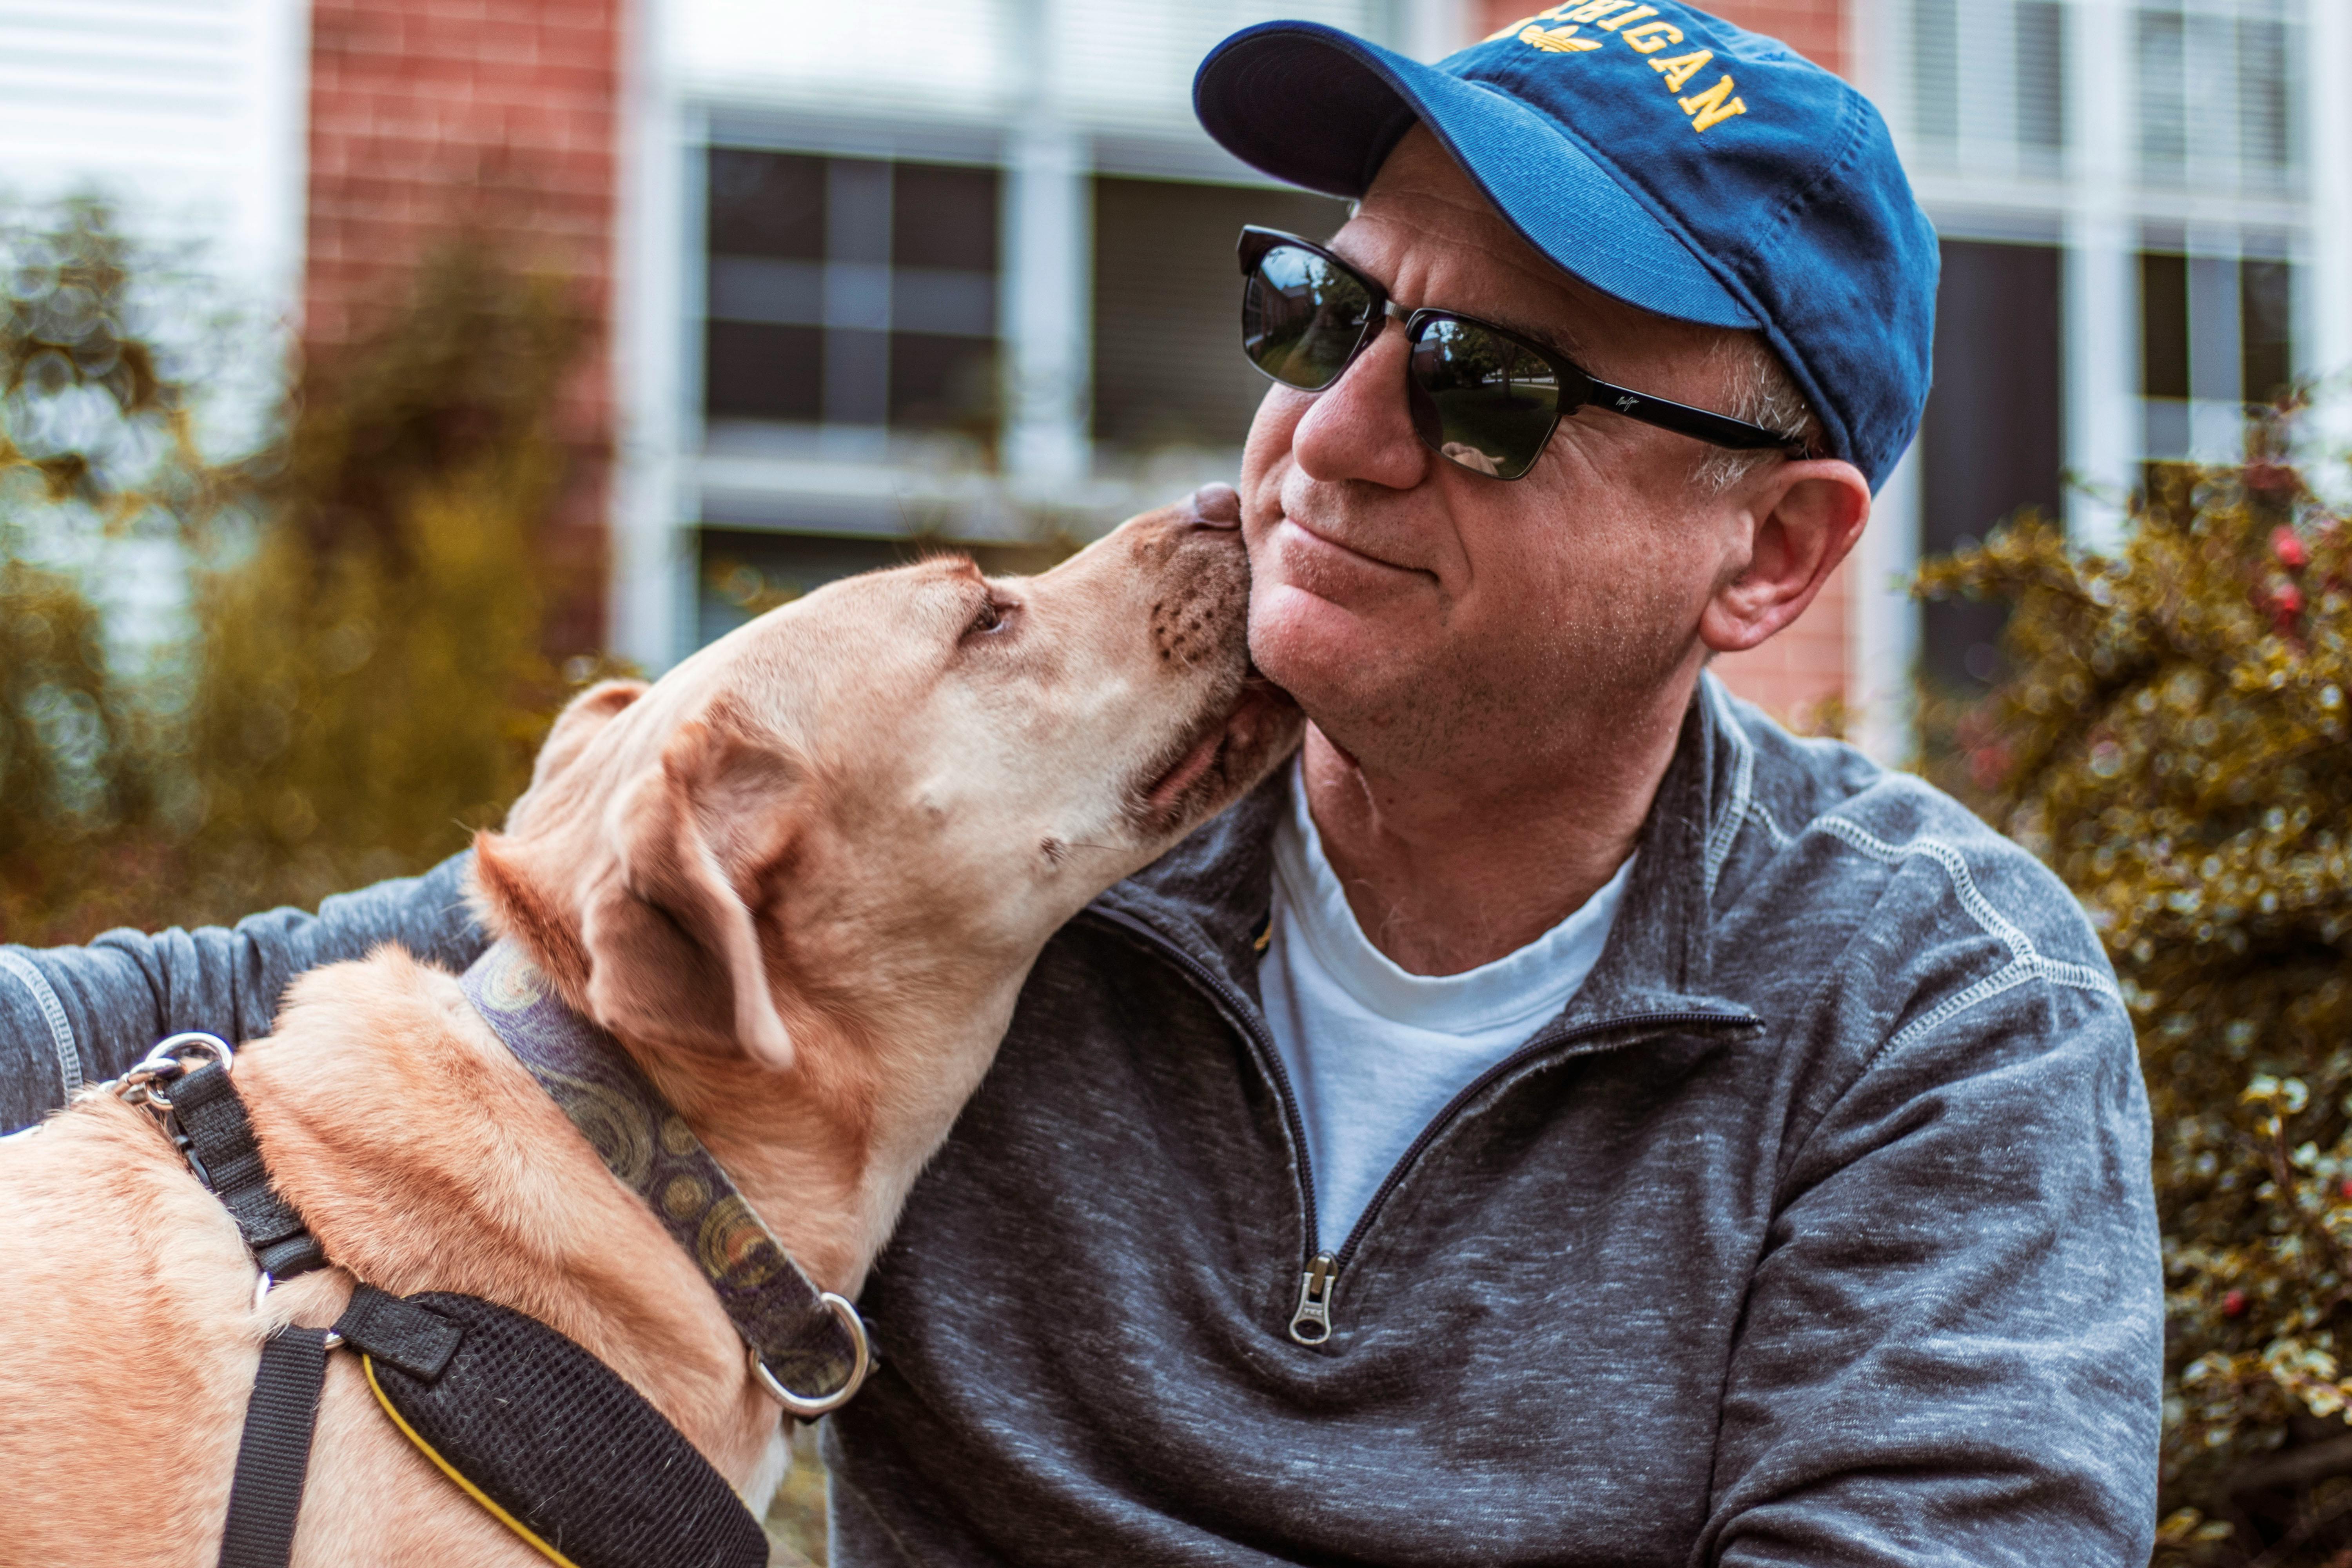 Dog licking the face of the man. | Photo: Pexels